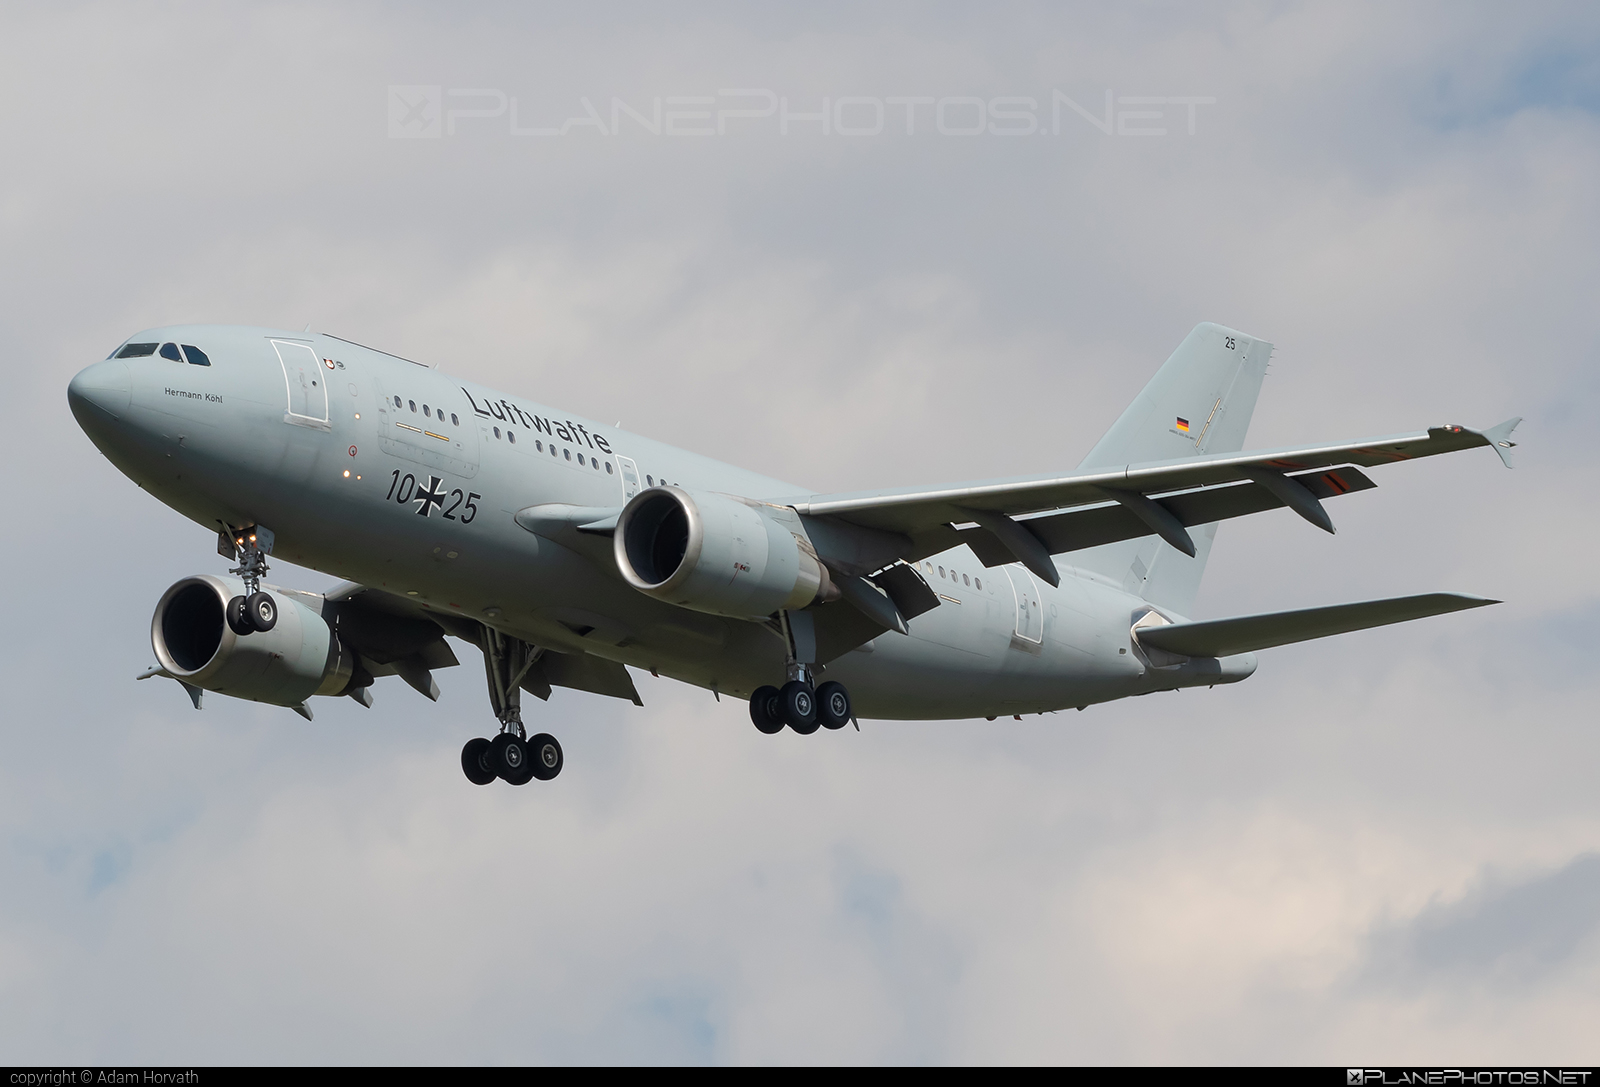 Airbus A310-304MRTT - 10+25 operated by Luftwaffe (German Air Force) #GermanAirForce #a310 #a310mrtt #airbus #airbus310 #airbus310mrtt #airbusmrtt #luftwaffe